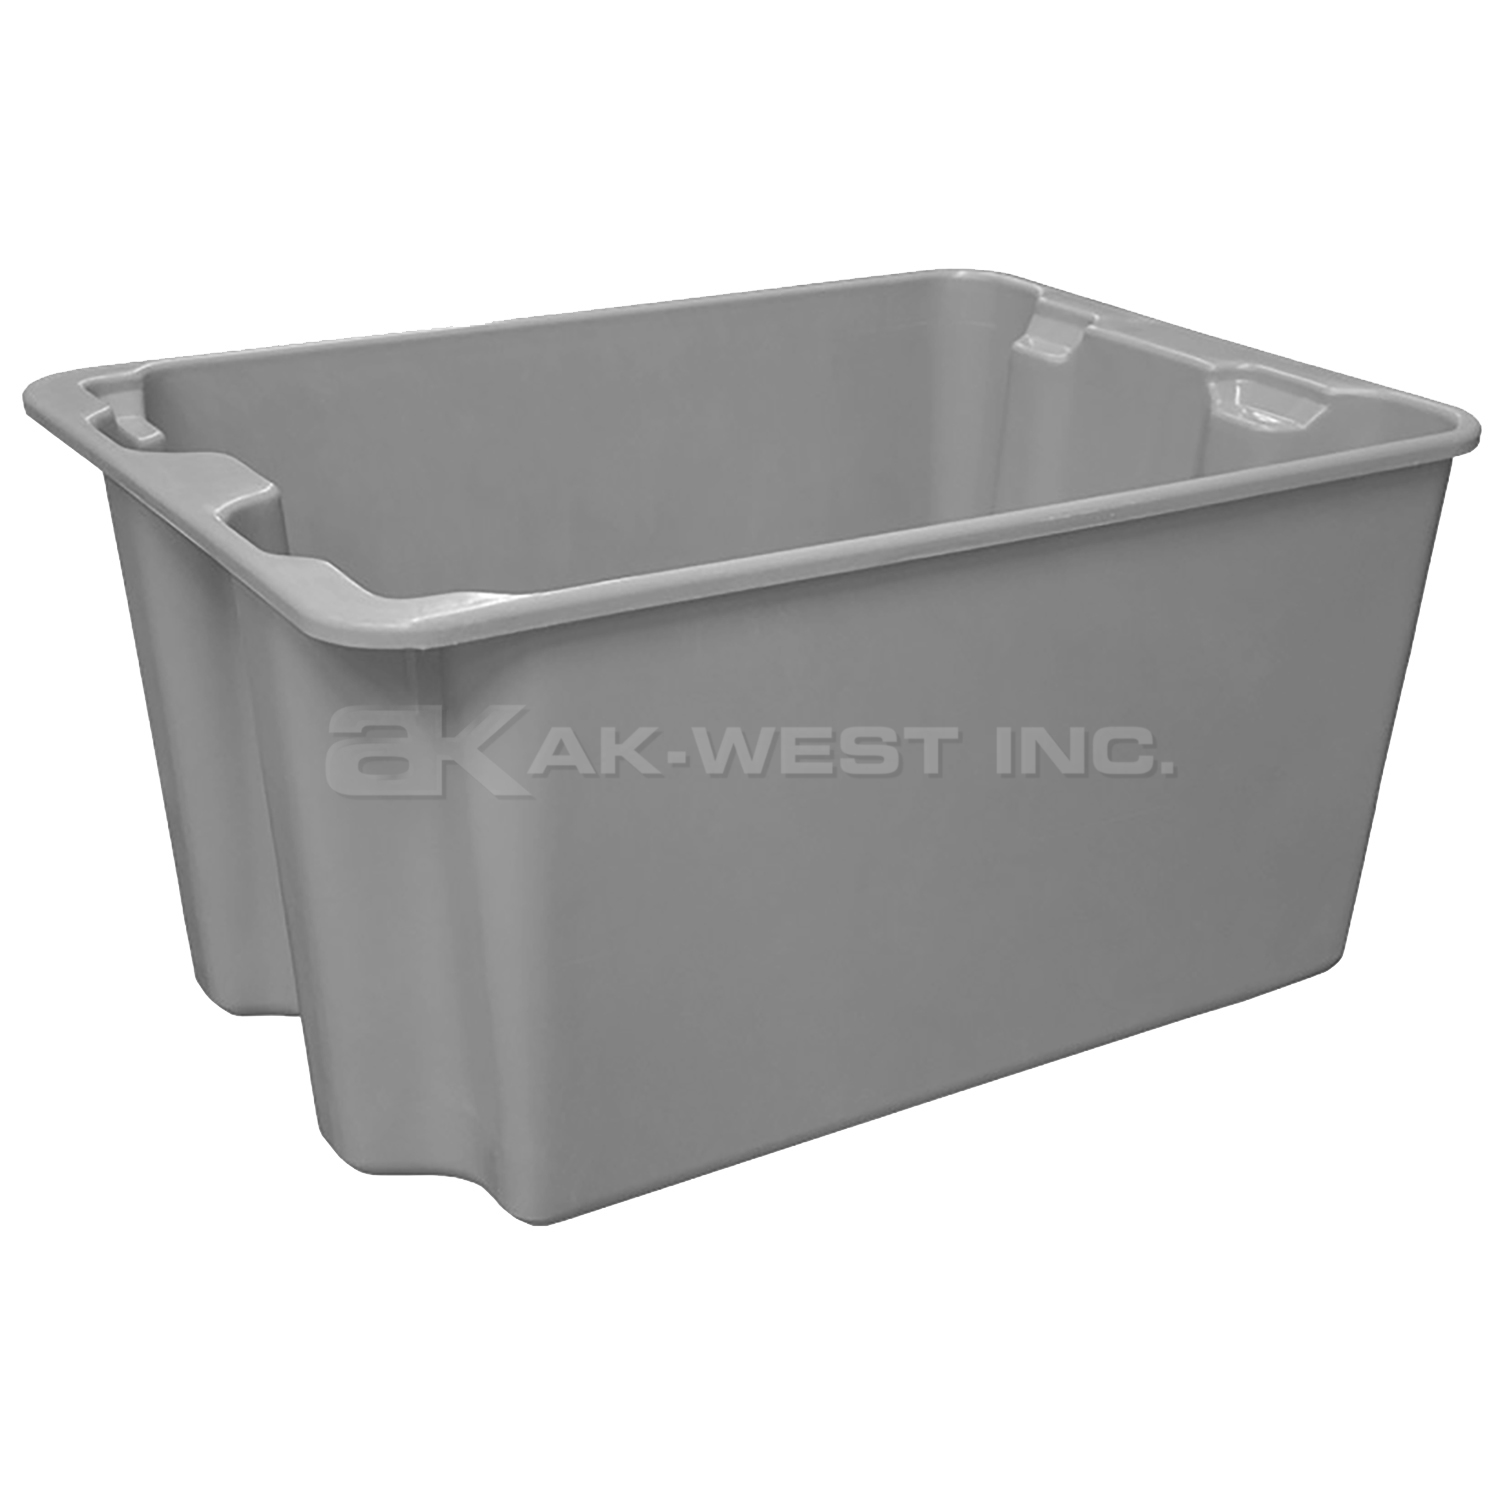 Grey, 27-1/2"L x 20"W x 14-1/8"H, Fiberglass Reinforced Stack and Nest Container